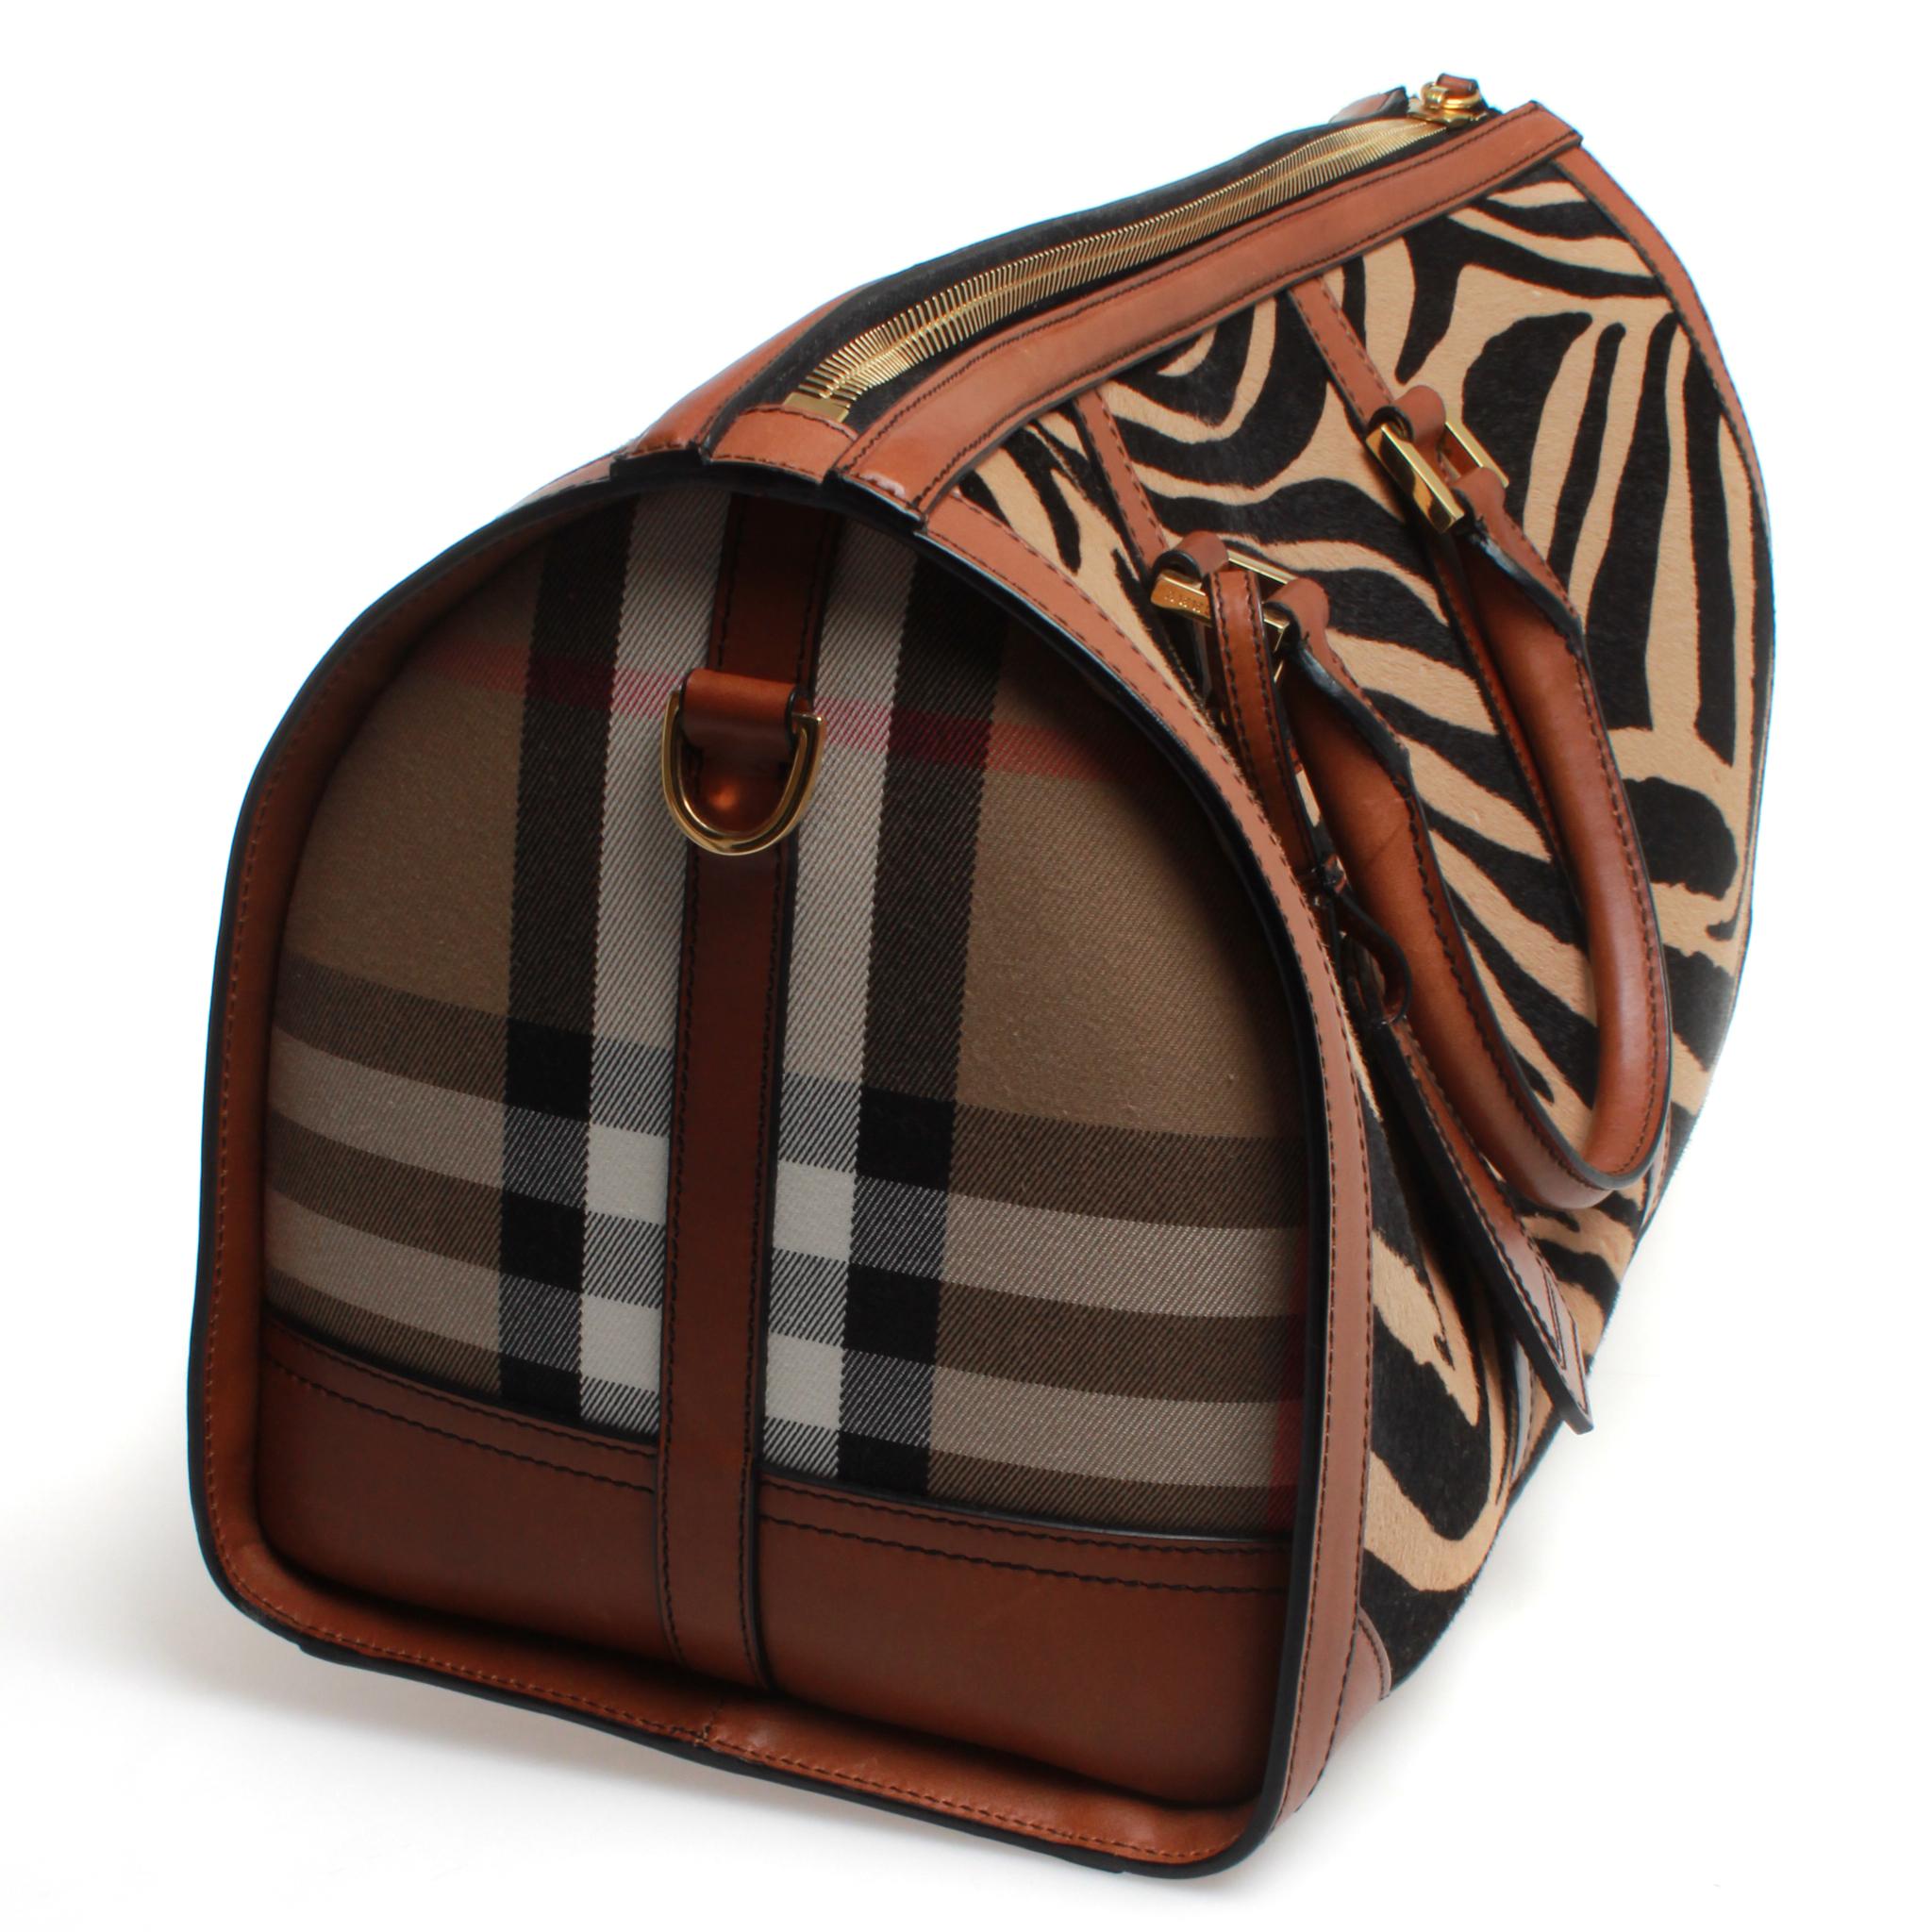 Burberry Prorsum Duffle Bag Brown Zebra Pony Skin & Classic Print. This is a 2013 collection bag. It has been used just once & since been in storage. It has the original dust bad and smells brand new. It has gold hardware and dark brown leather and